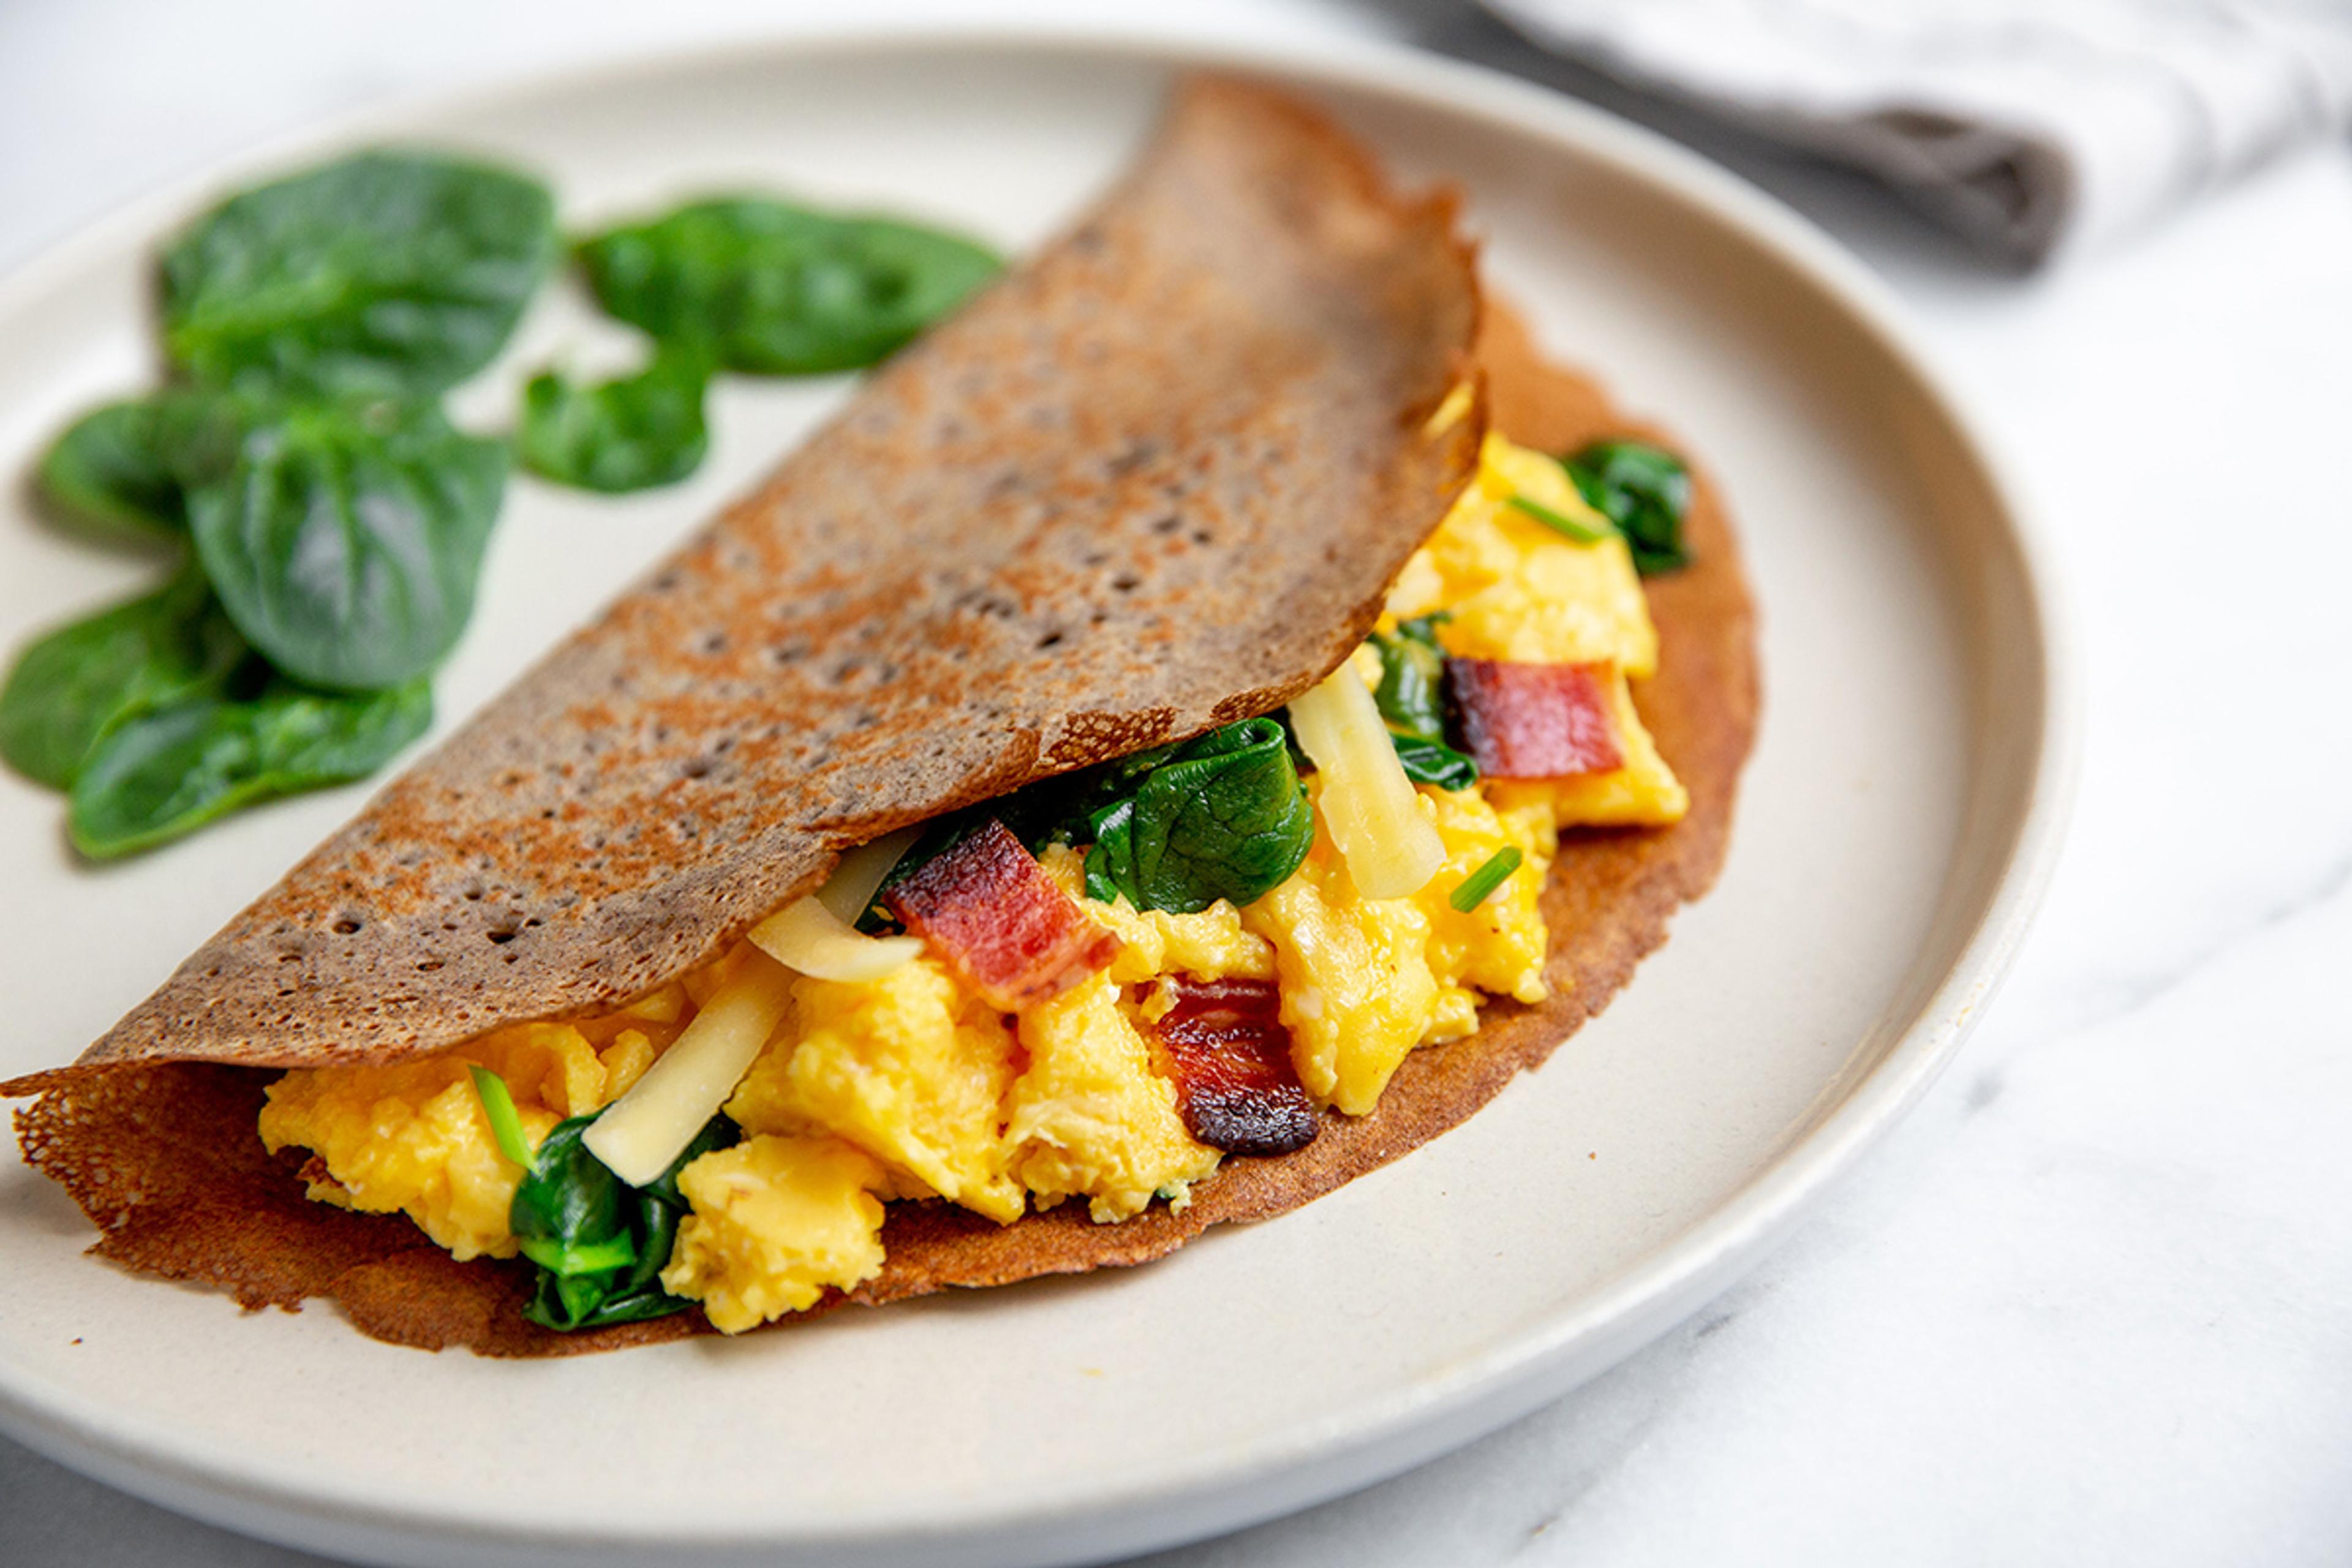 Savory gluten-free crepes filled with scrambled eggs, cheese, spinach and bacon.